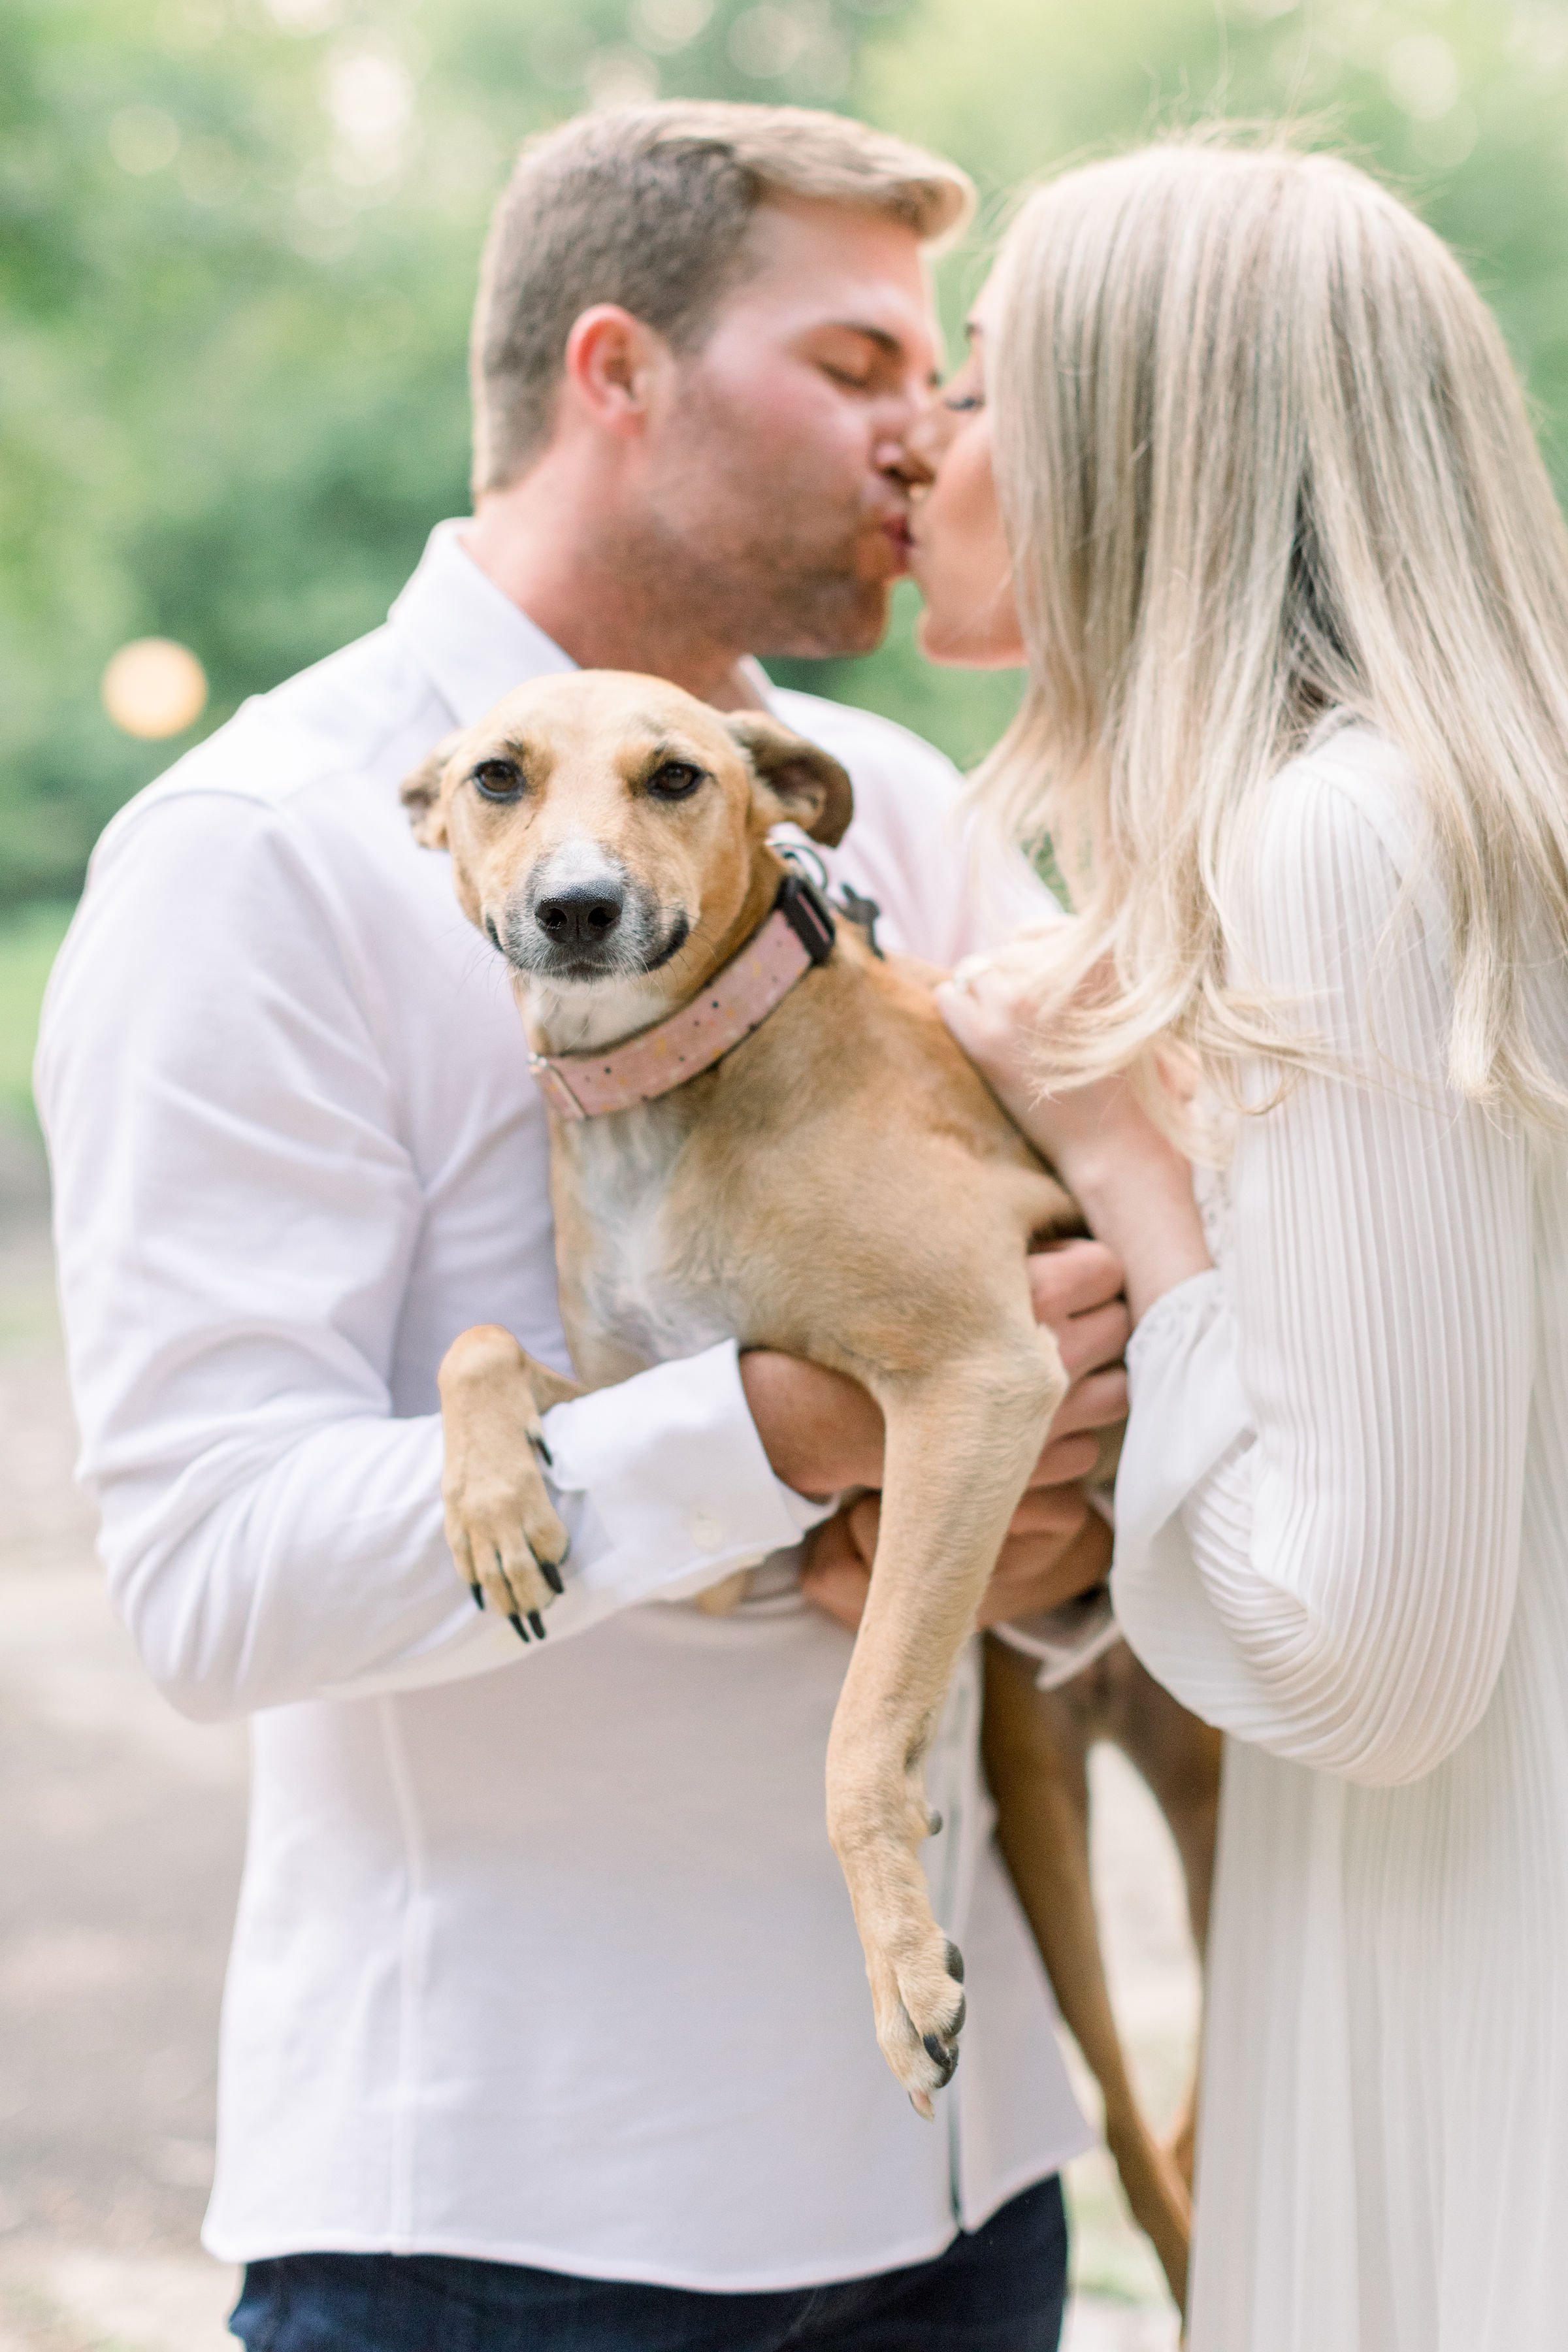  Man and woman kiss while holding their dog in Ottawa by Chelsea Mason Photography. all white engagement outfits center dog #Ottawaengagements #Ottawaweddingphotographers #engagementwithdogs #ChelseaMasonPhotography #ChelseaMasonEngagements  